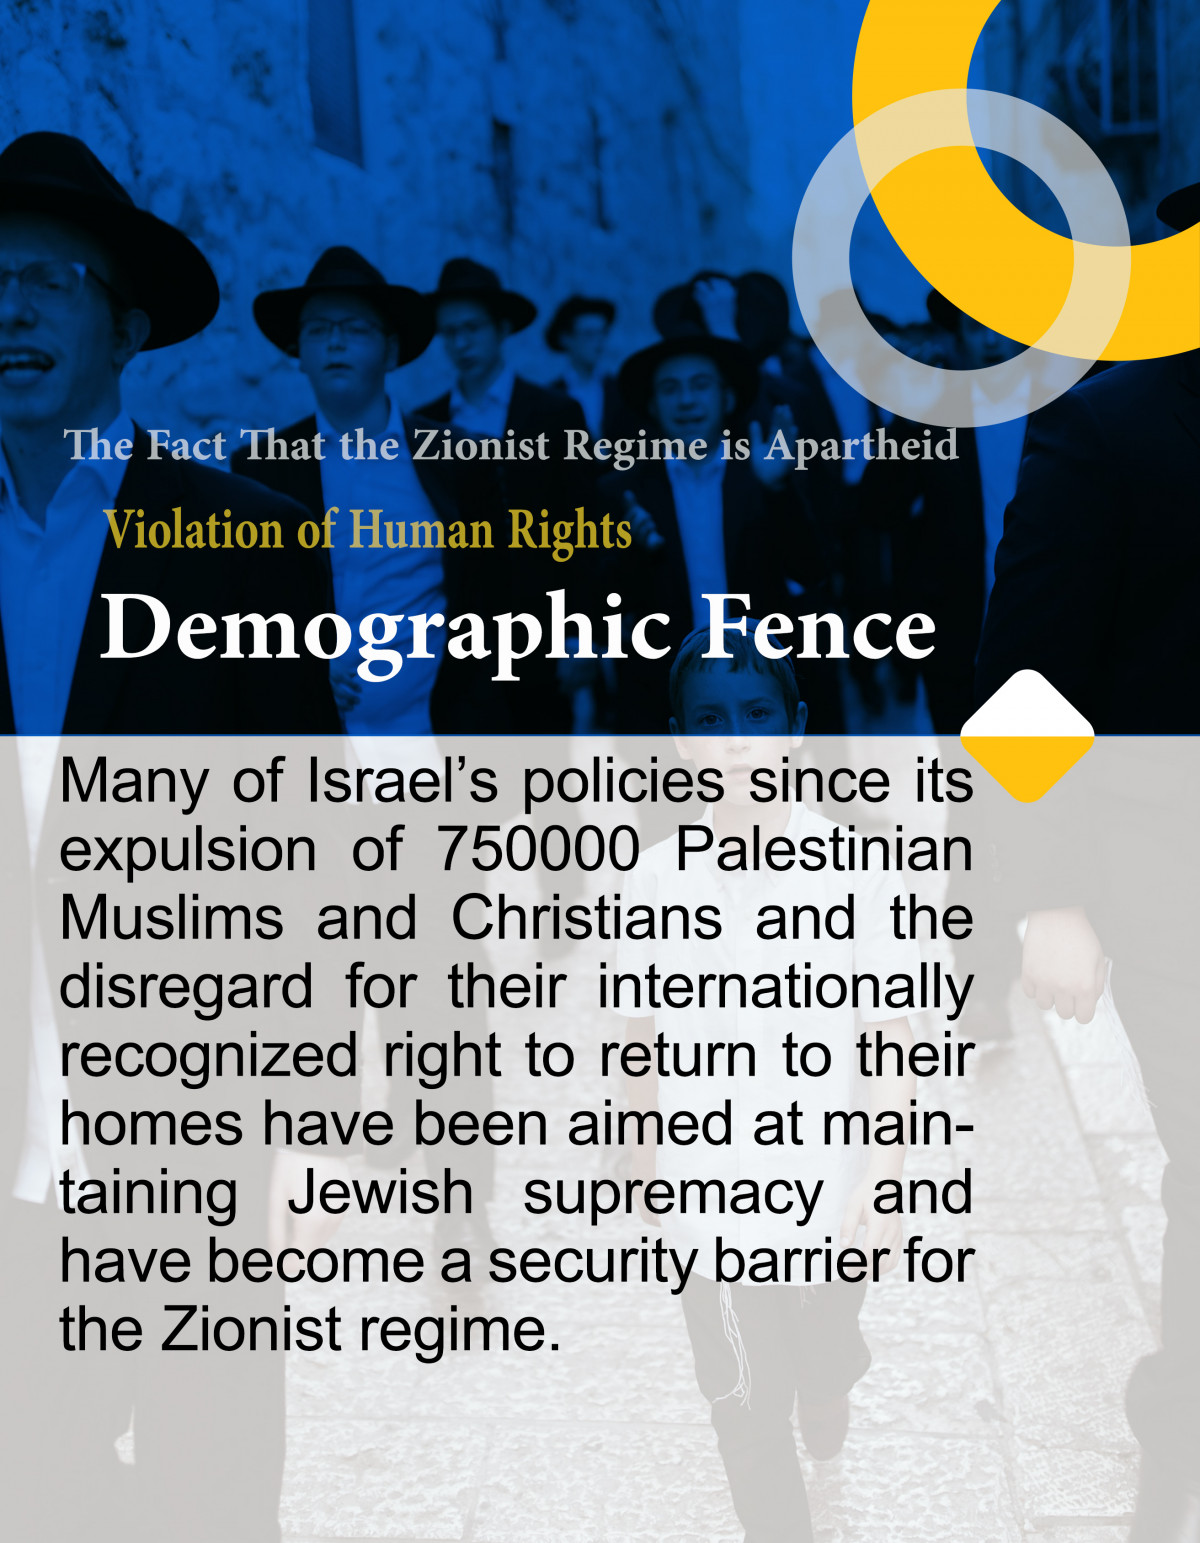 the fact that the Zionist regime is apartheid